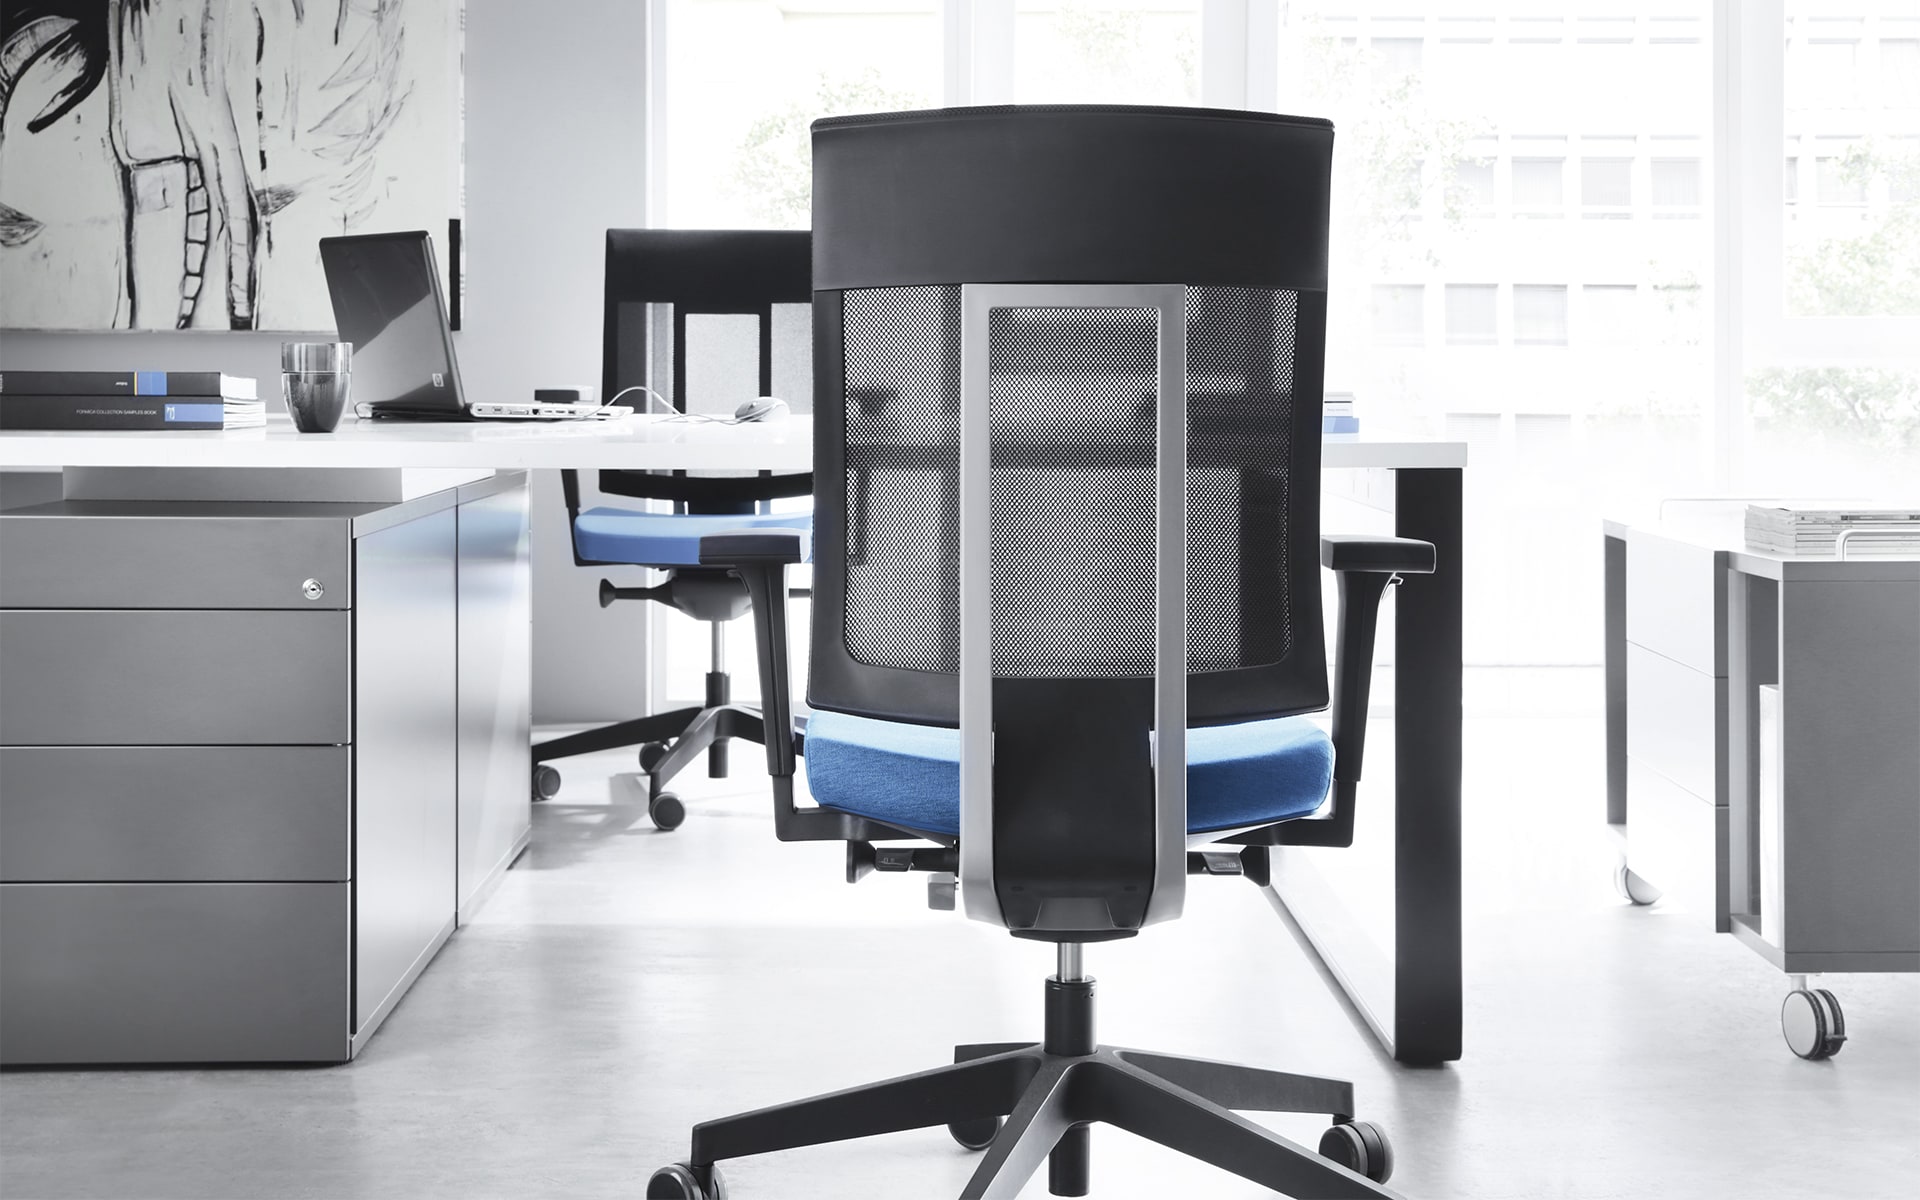 Profim Xenon office chairs by ITO Design with mesh backrests and blue upholstery at modern desk